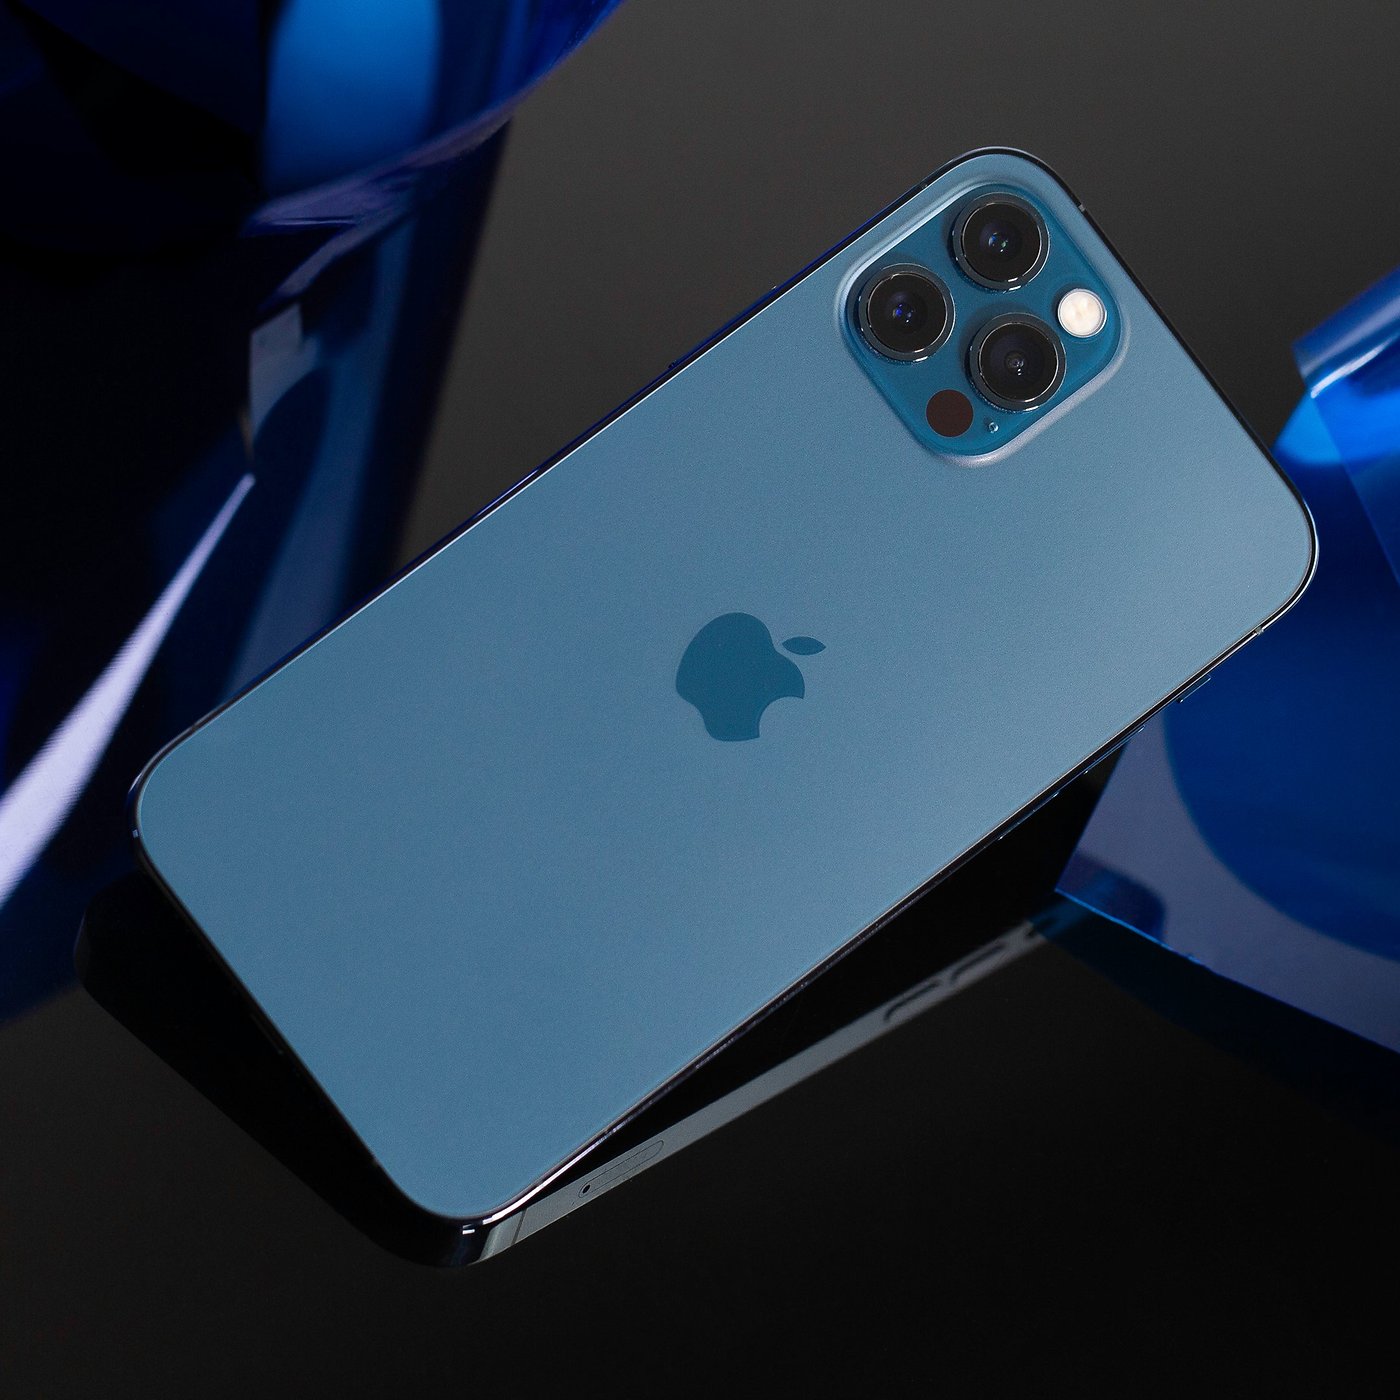 Apple iPhone 12 Pro review: a new design that rules? | nextpit